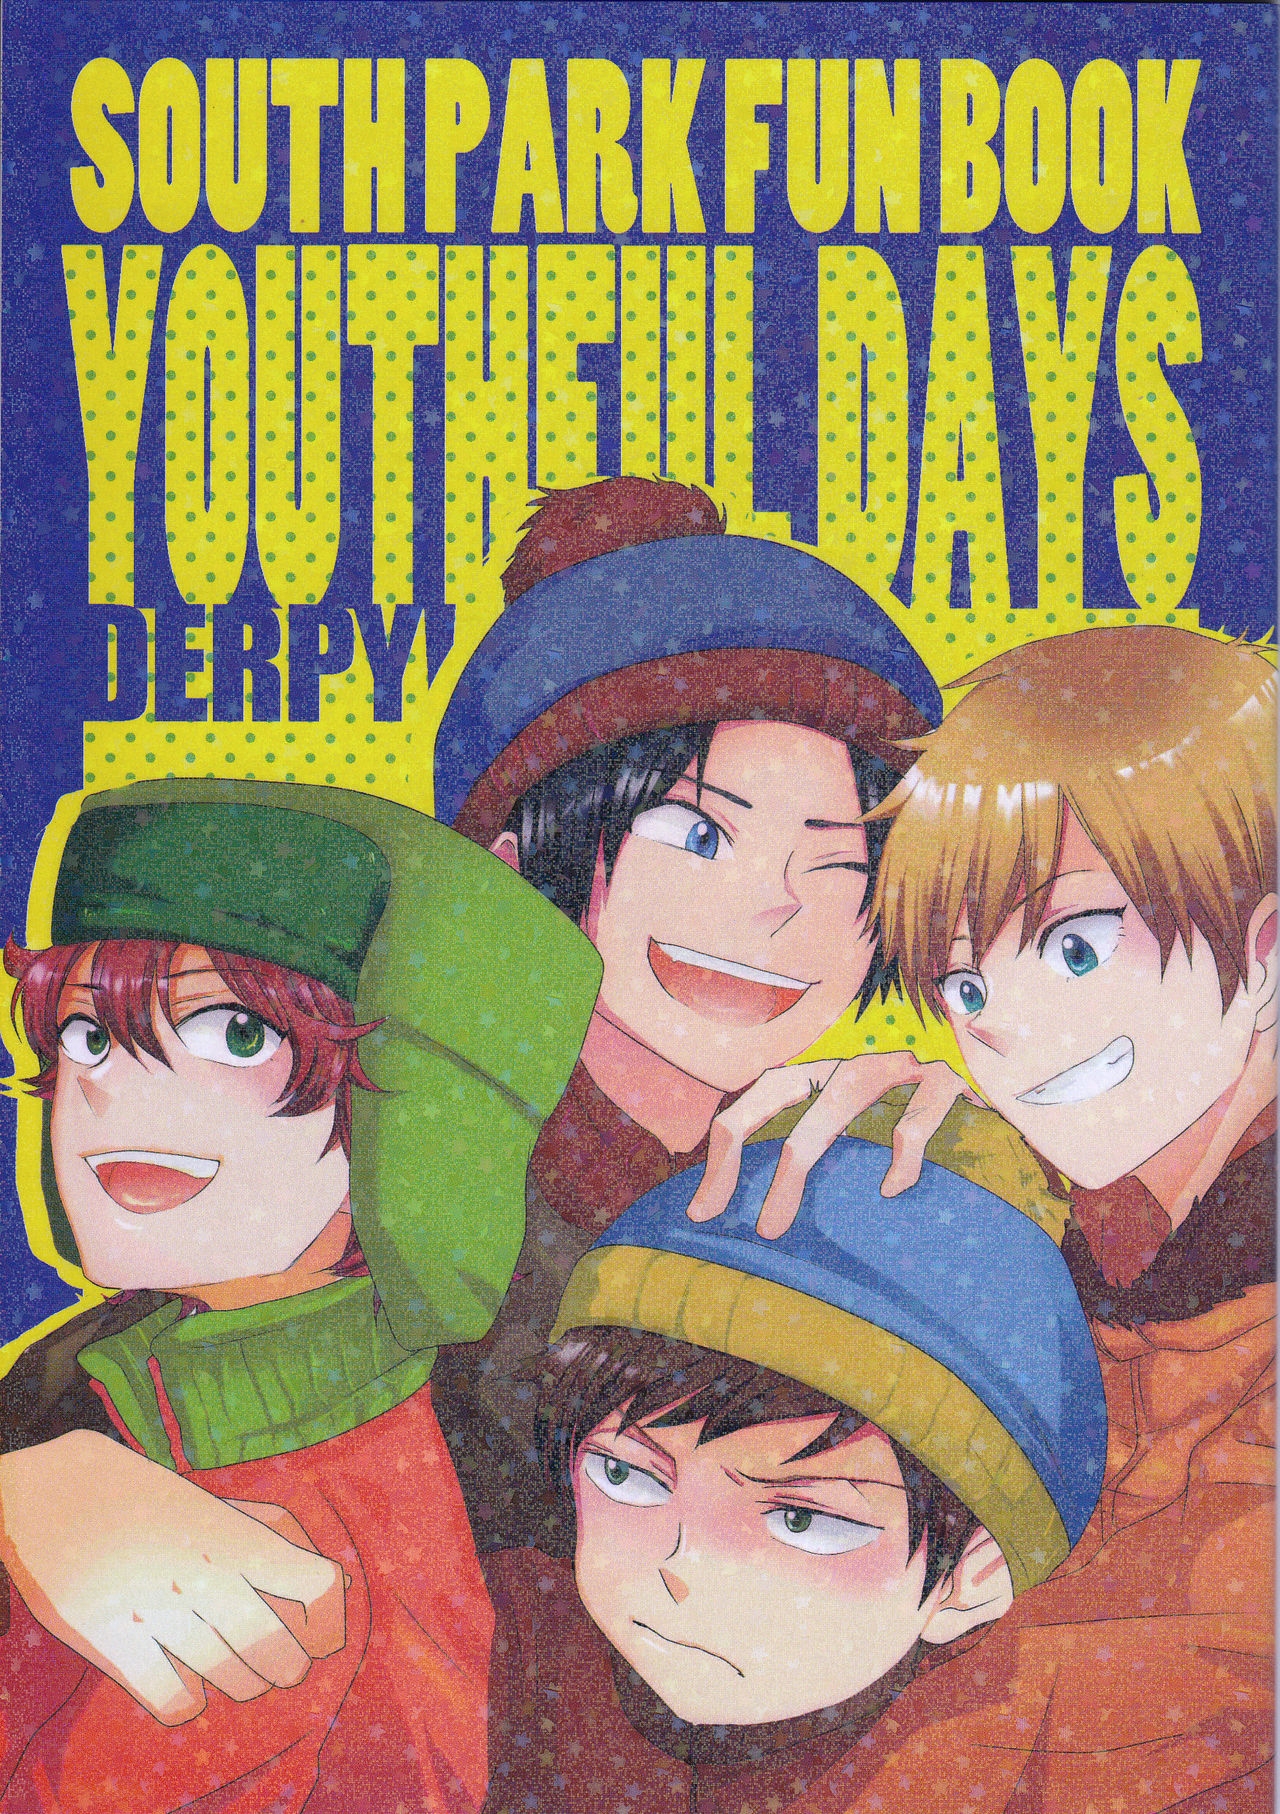 [DERP (Various)] YOUTHFULDAYS (South Park) [English] 0